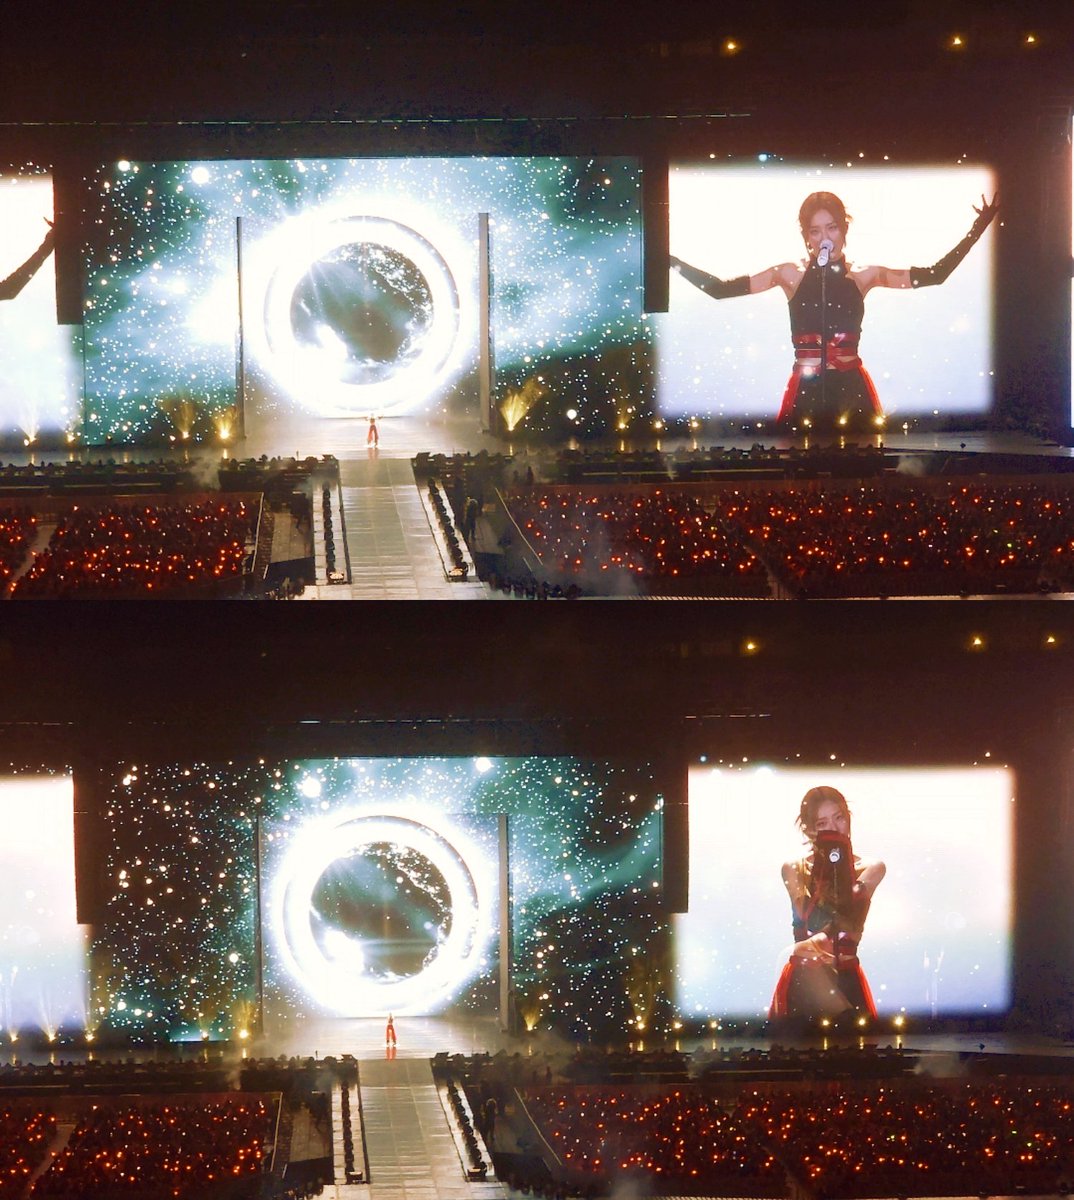 There must be lots of difficulties to overcome but Seulgi and Bambam finally made all of these happen since bam2 had been talking about the collaboration since 2022. And this is the beautiful orange ocean, which that company had never given her😖 #SeulgiArea52inBKK
#슬기 #SEULGI